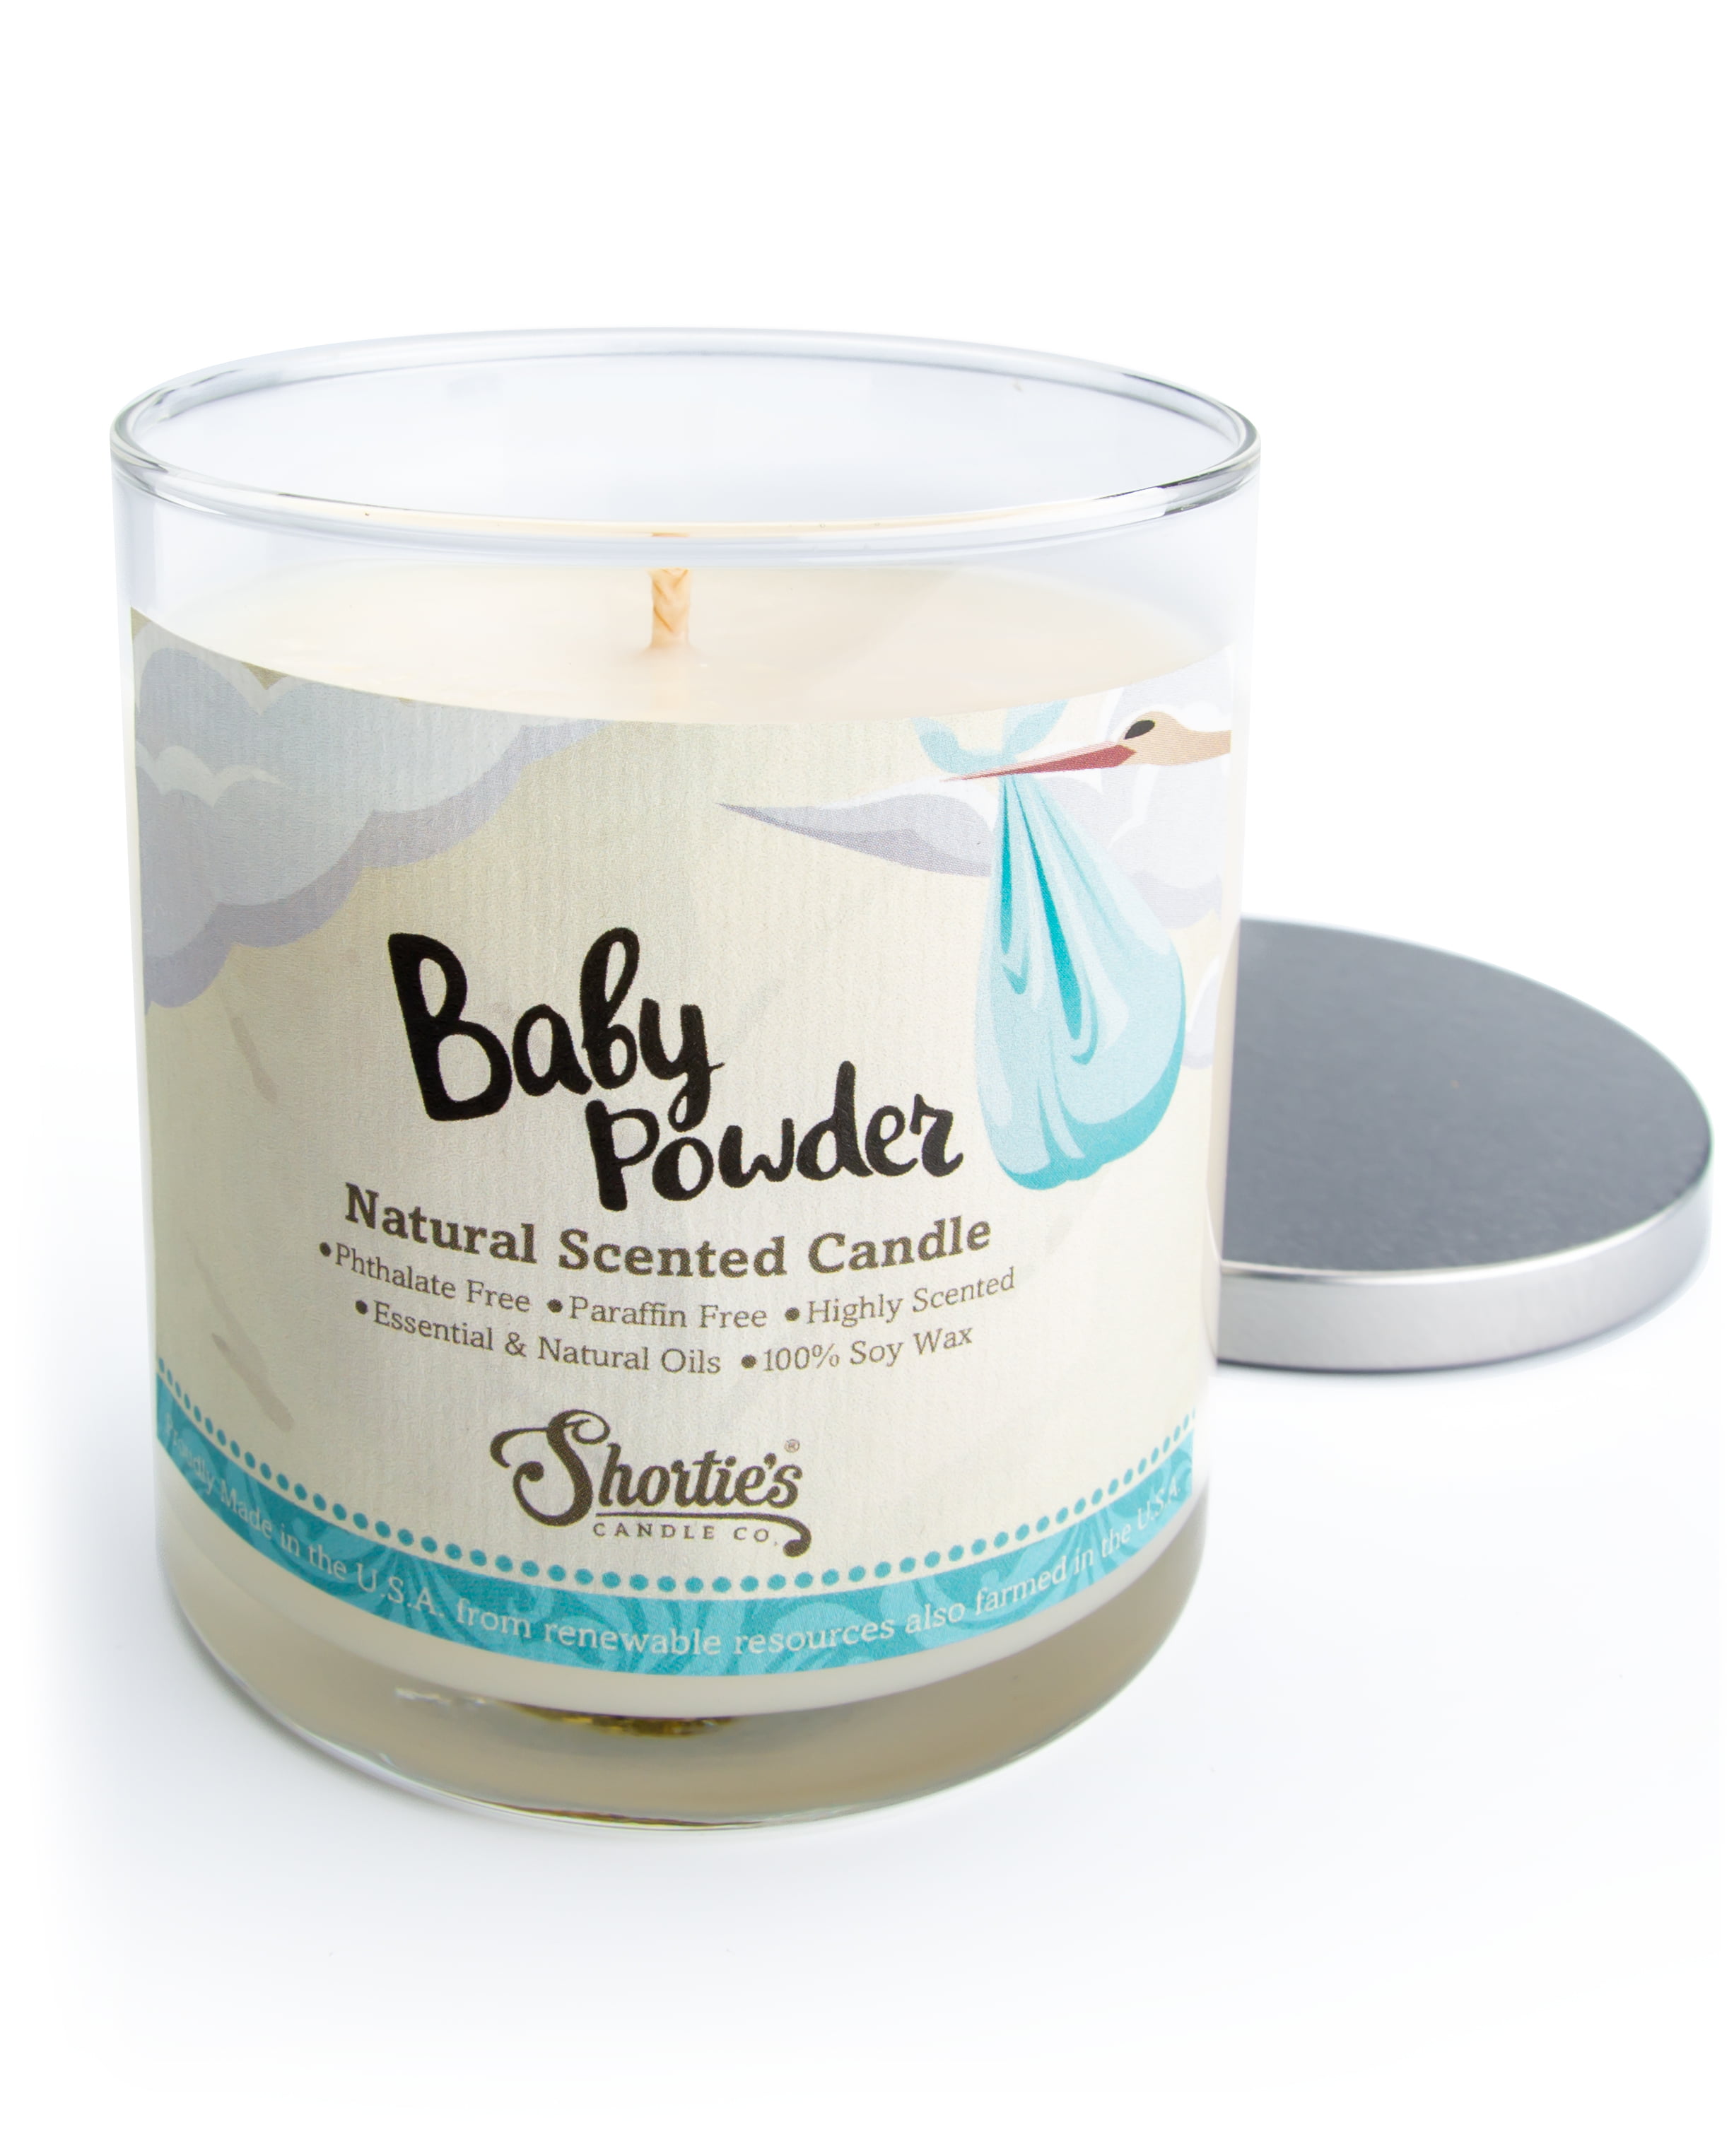 Baby Powder & Spearmint Soy Candle - Preeminence- Custom Fragrance and  Personalised Perfume